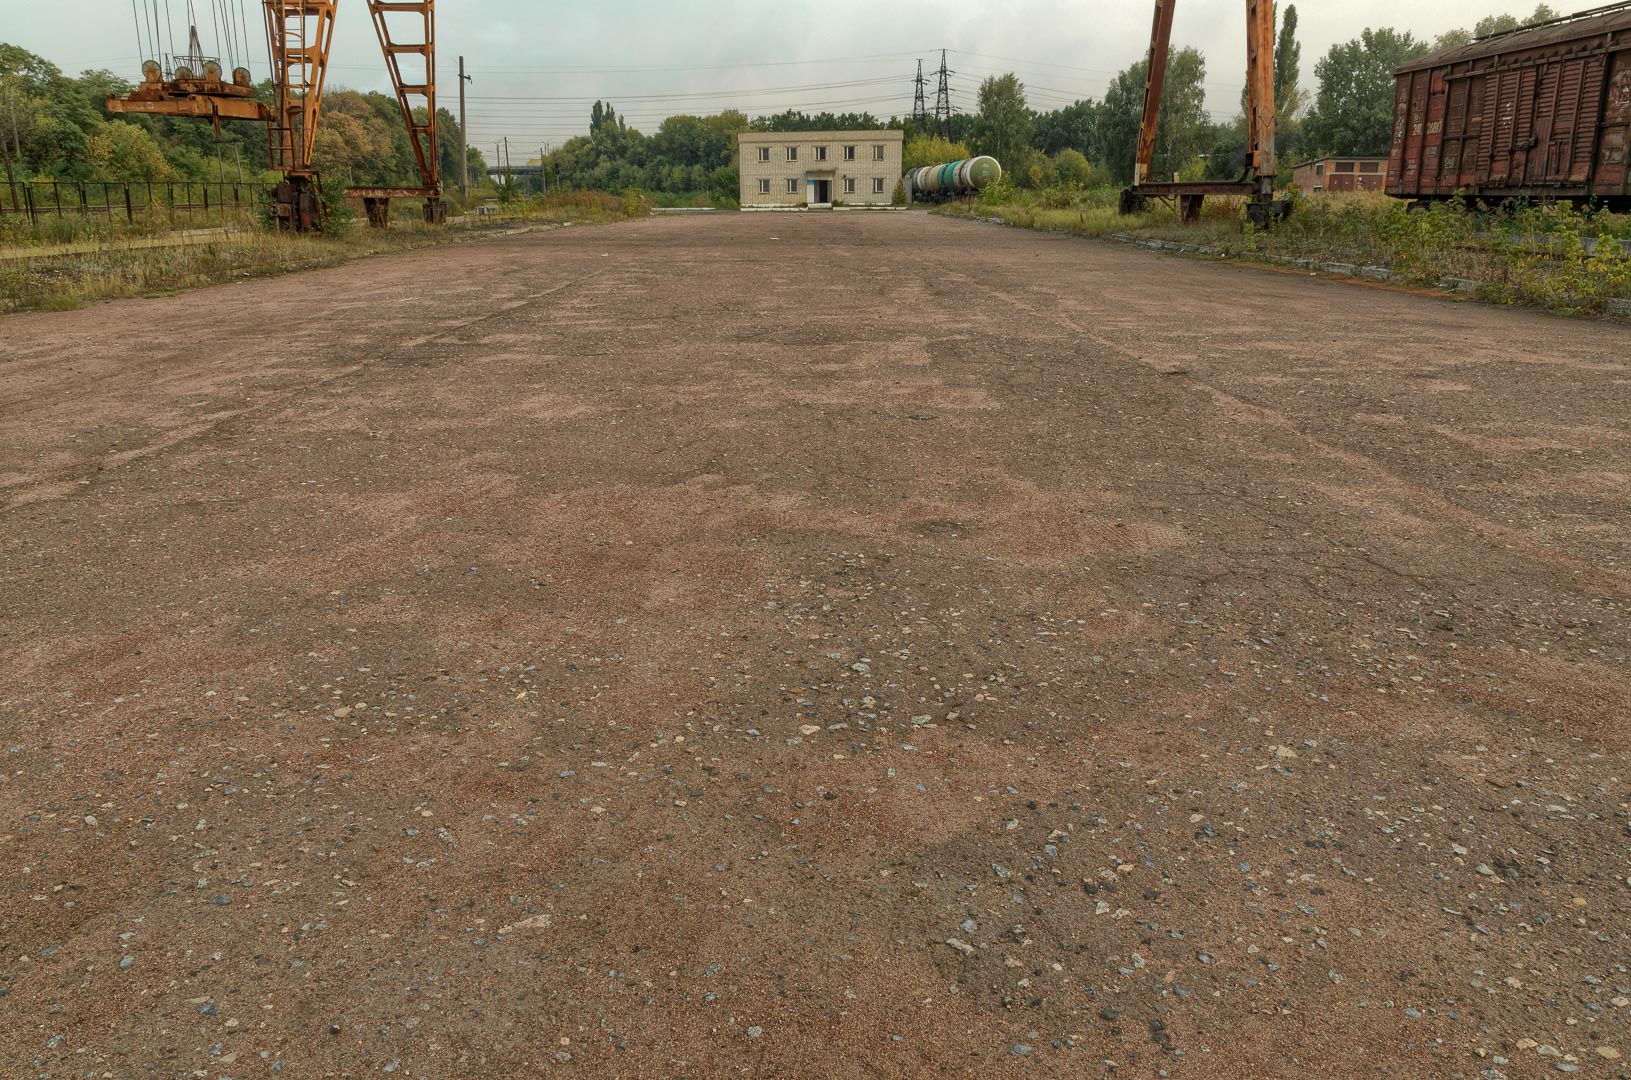 Backplate • ID: 8878 • HDRI Haven - Parking Lot By Railway